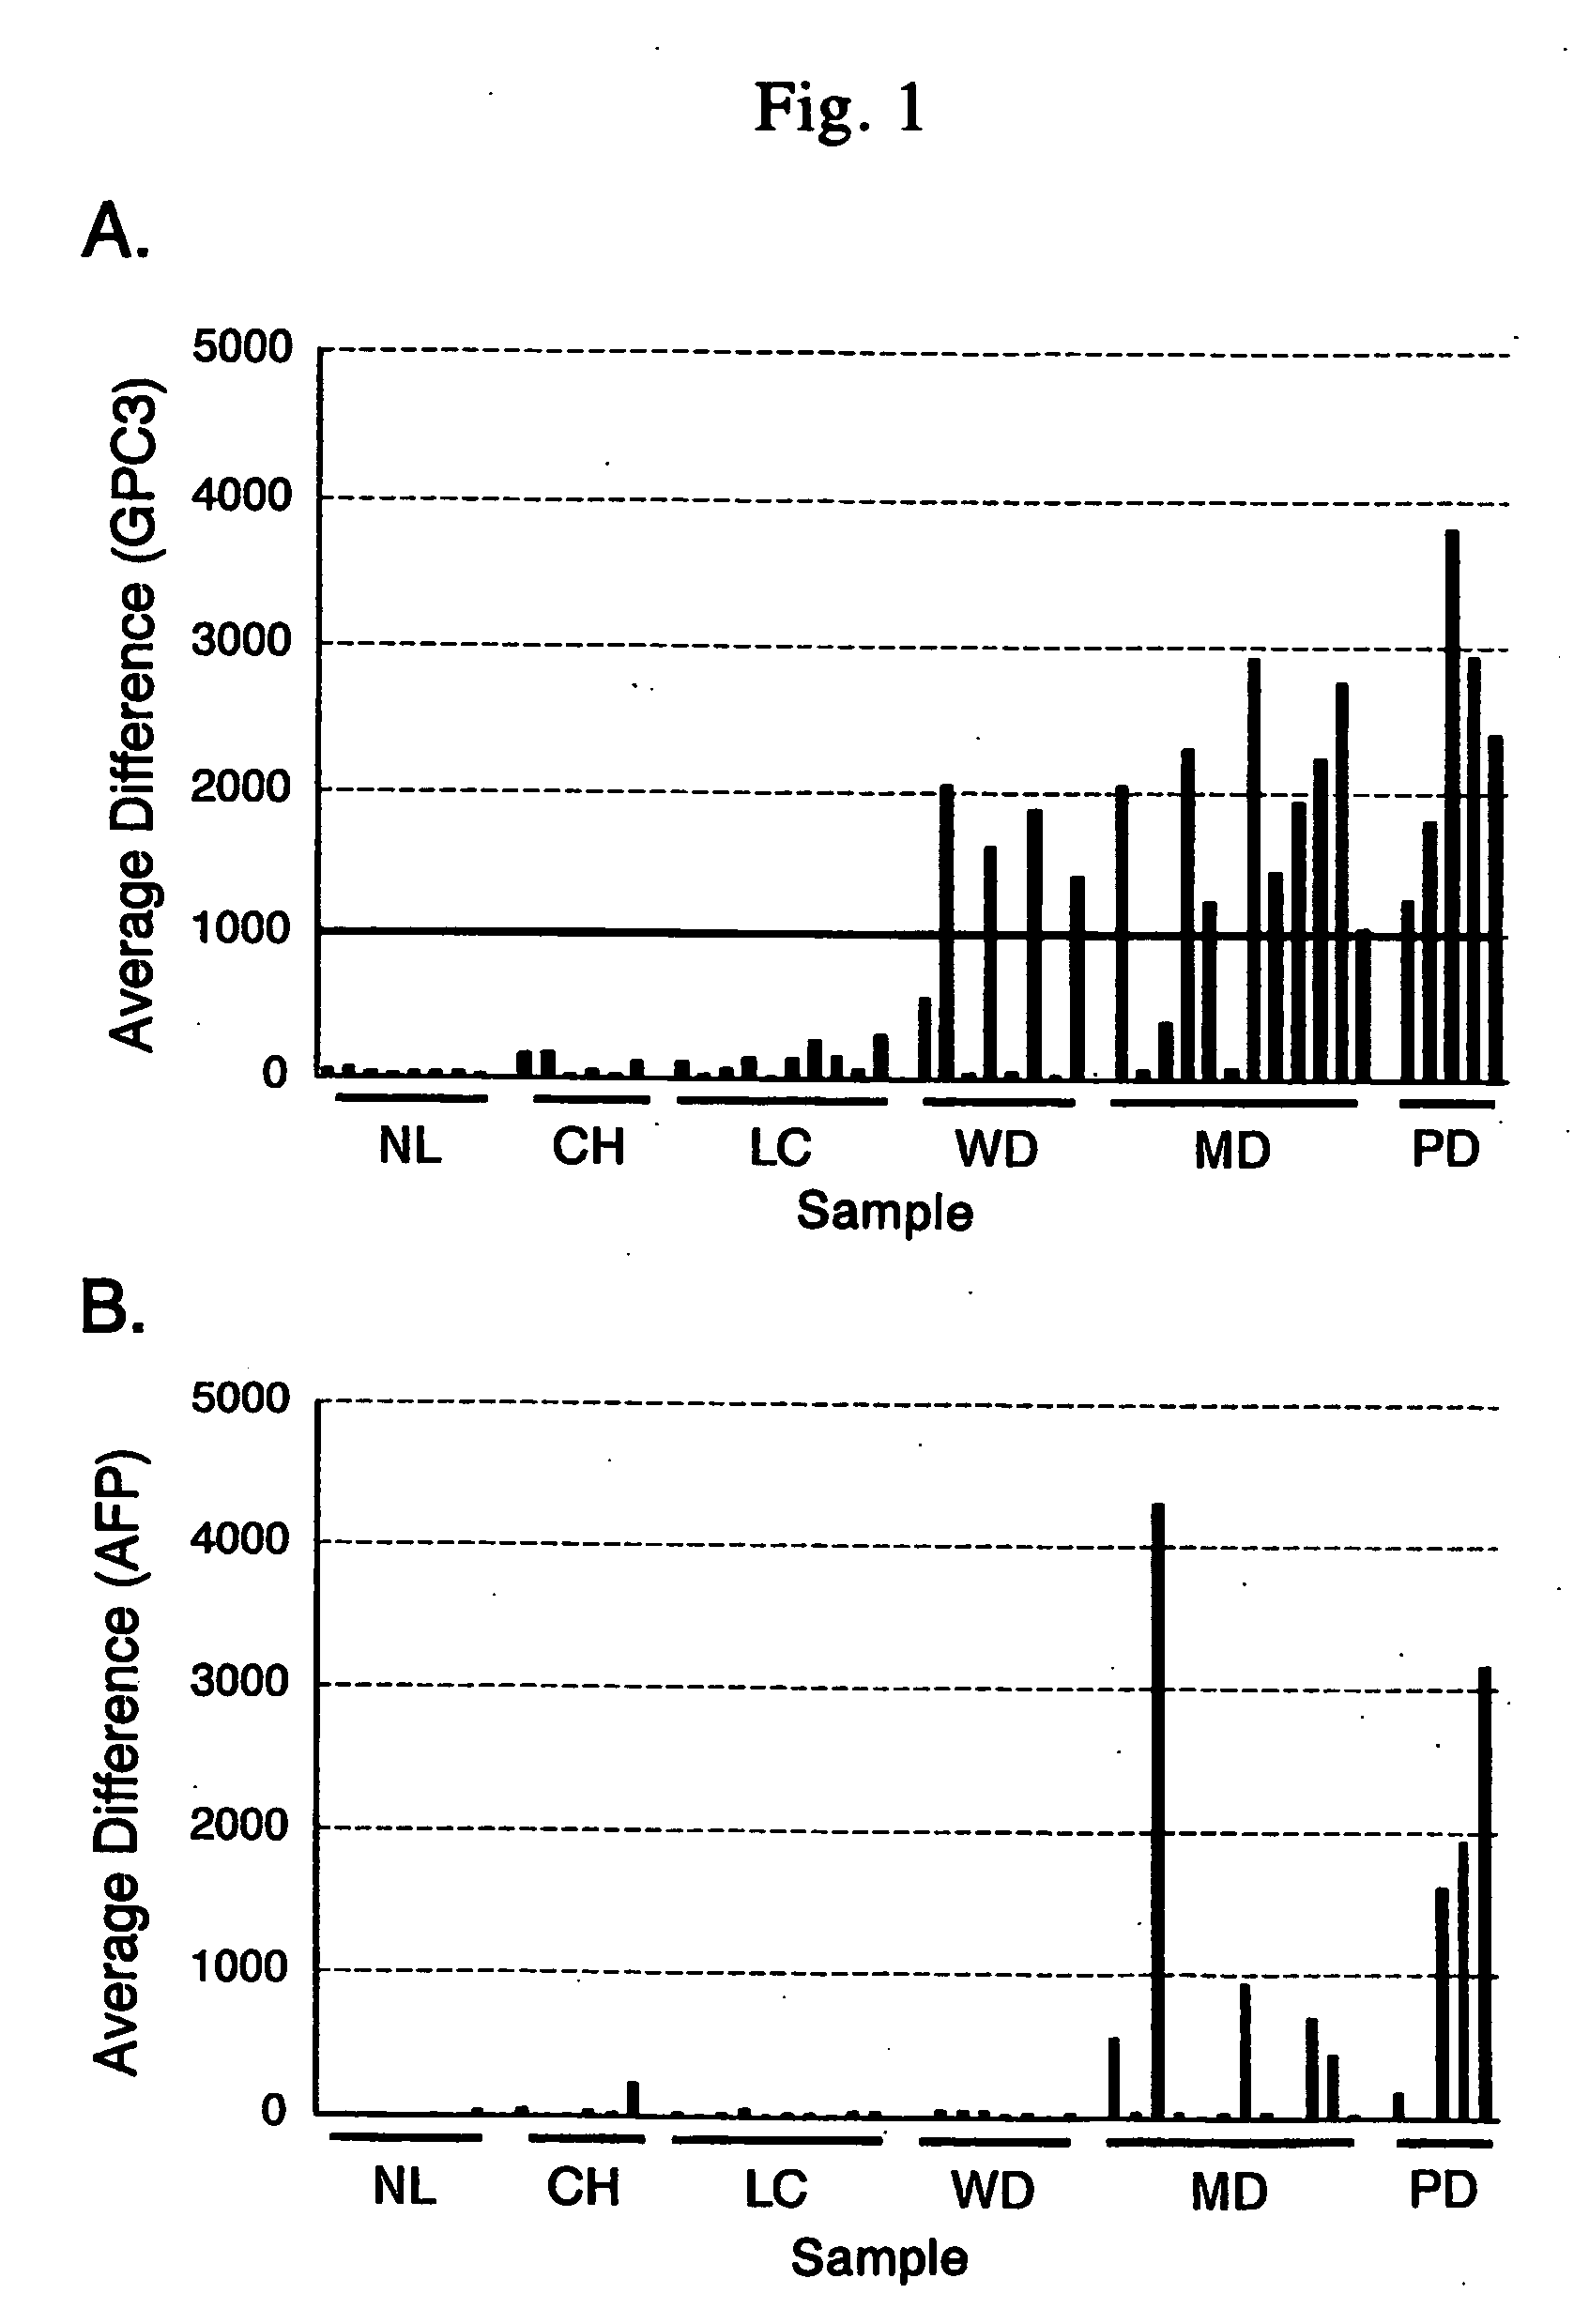 Antibody against n-terminal peptide or c-terminal peptide of gpc3 solubilized in blood